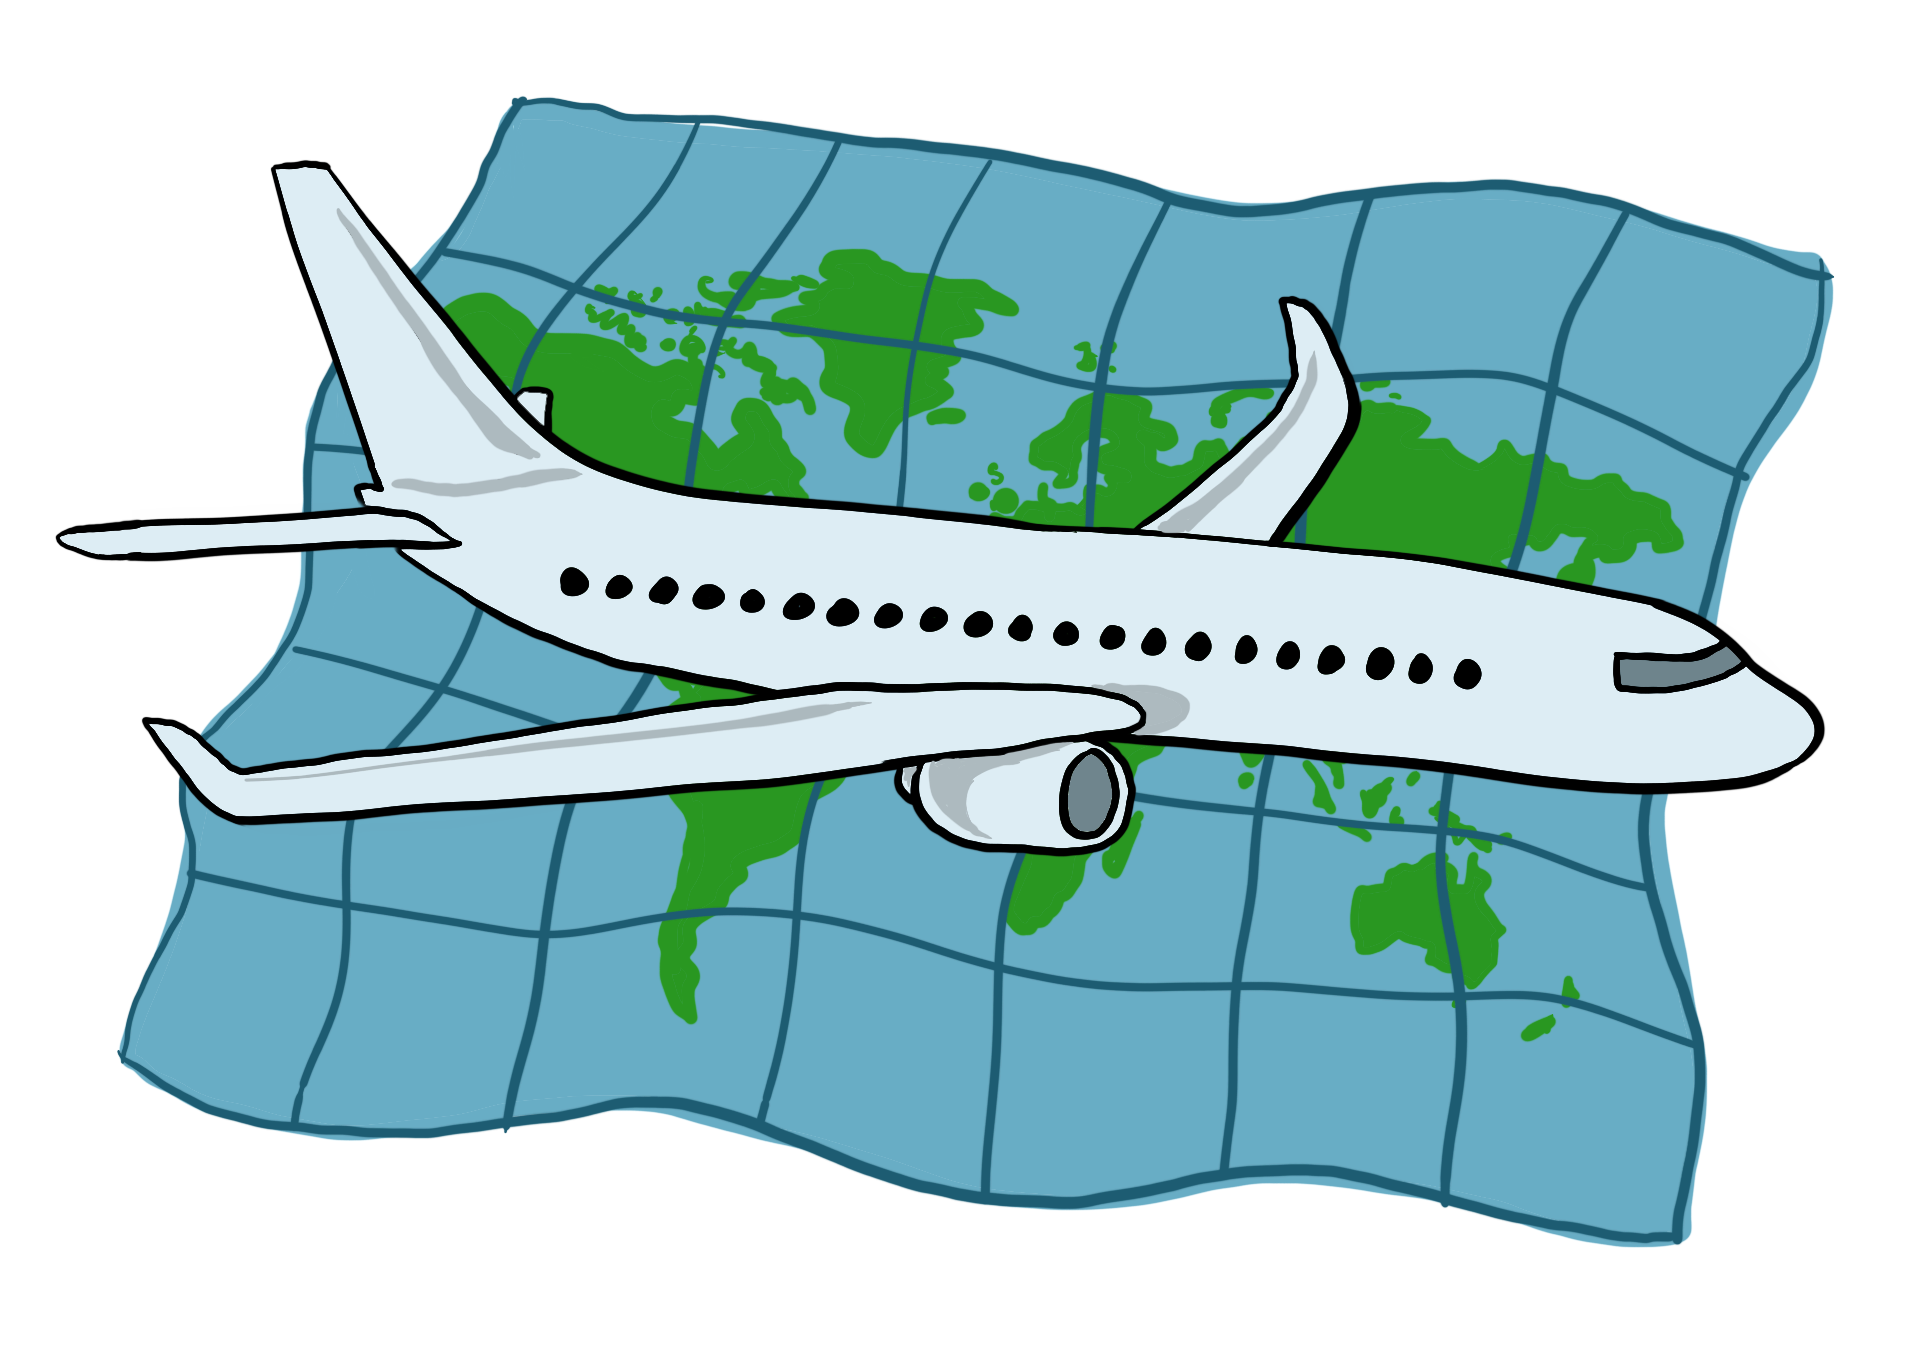 An illustration of a plane in front of a map.